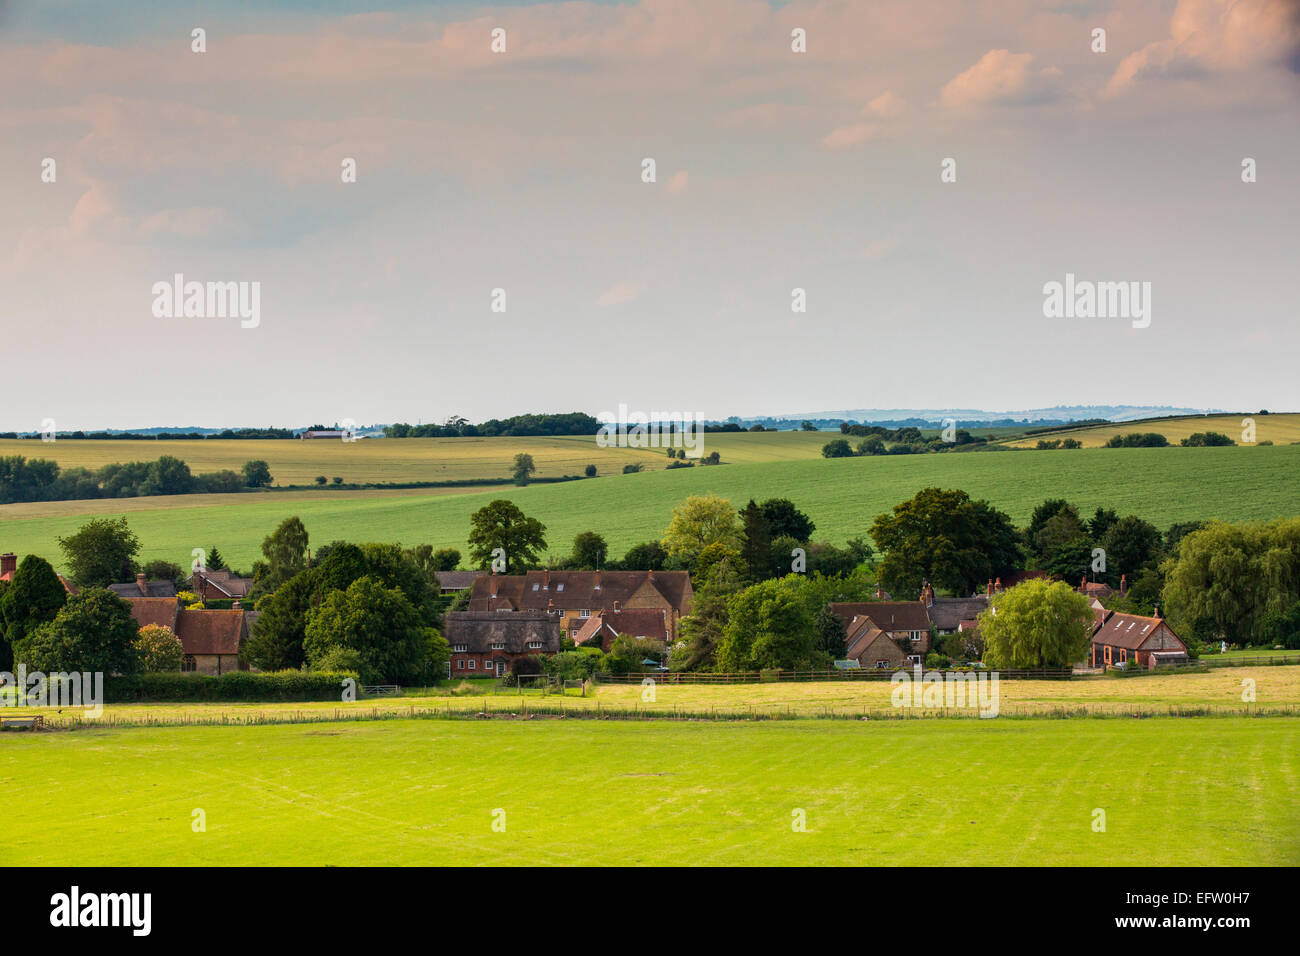 Distant view of traditional village in rural landscape, Oxfordshire, England Stock Photo